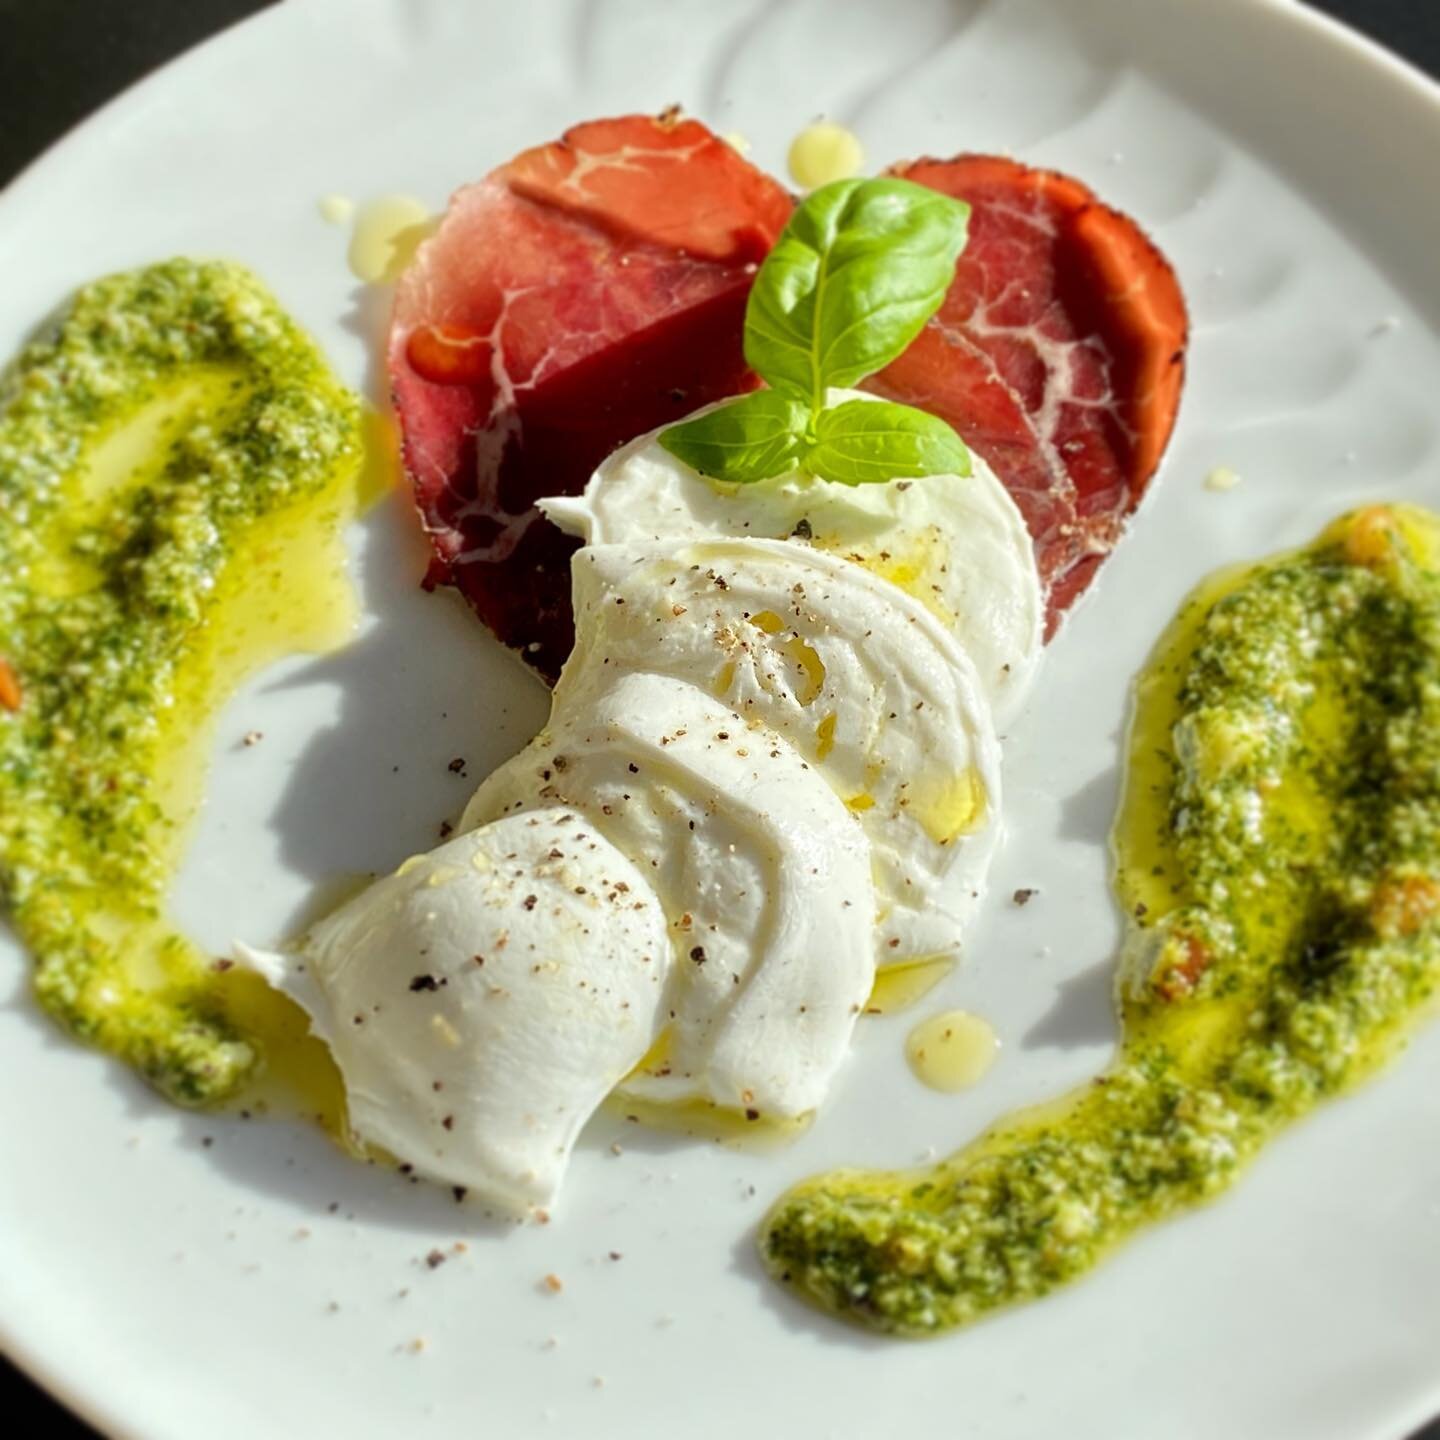 Fancy something fresh, simple and full of flavour to have as part of your Valentine&rsquo;s Day meal!! Buffalicious mozzarella and buffalo bresaola, accompanied by luxurious fresh pesto from @littlebasiltree. All part of our valentines 2-3 course mea